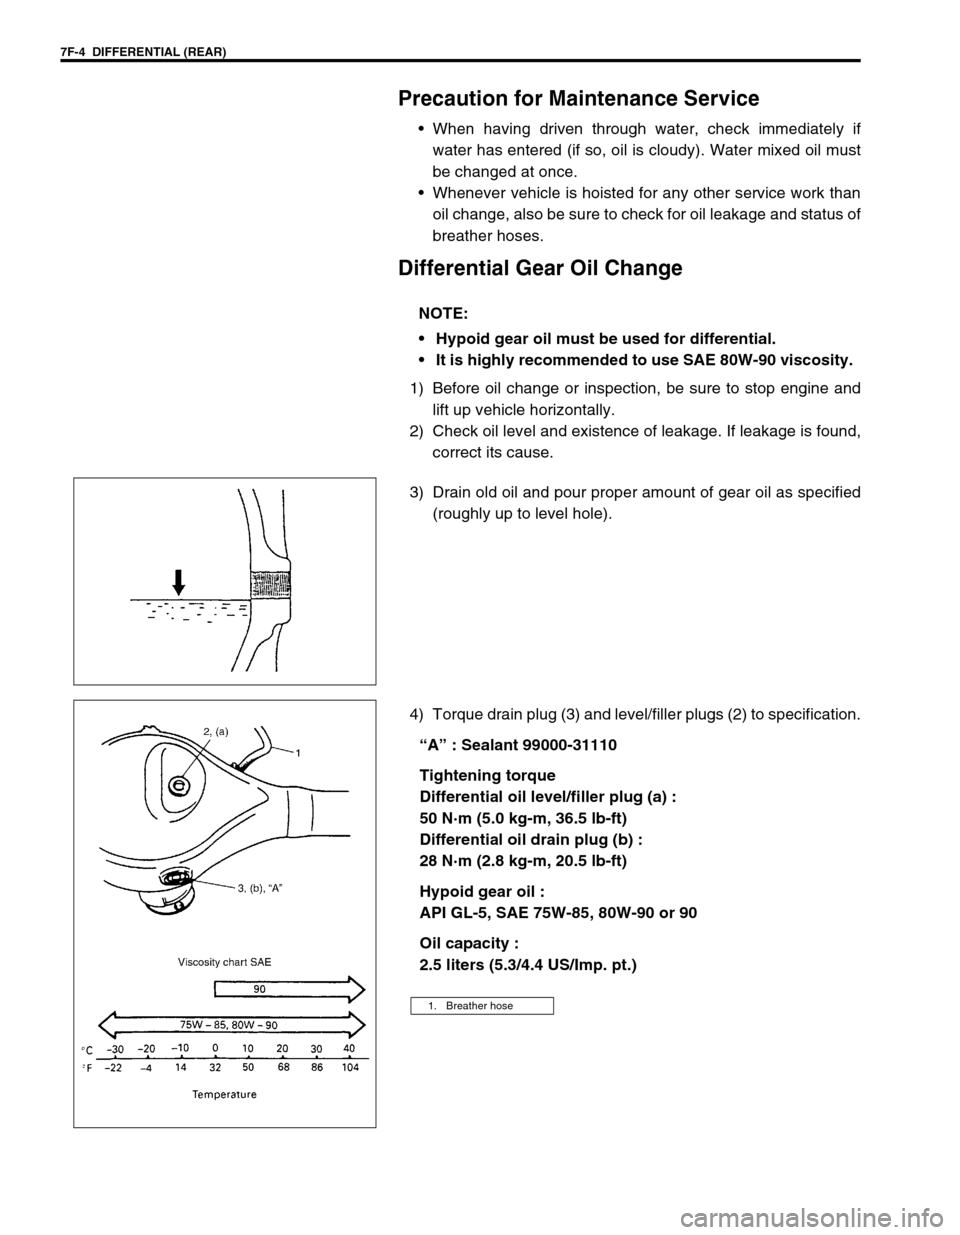 SUZUKI GRAND VITARA 1999 2.G Manual PDF 7F-4  DIFFERENTIAL (REAR)
Precaution for Maintenance Service
•When having driven through water, check immediately if
water has entered (if so, oil is cloudy). Water mixed oil must
be changed at once